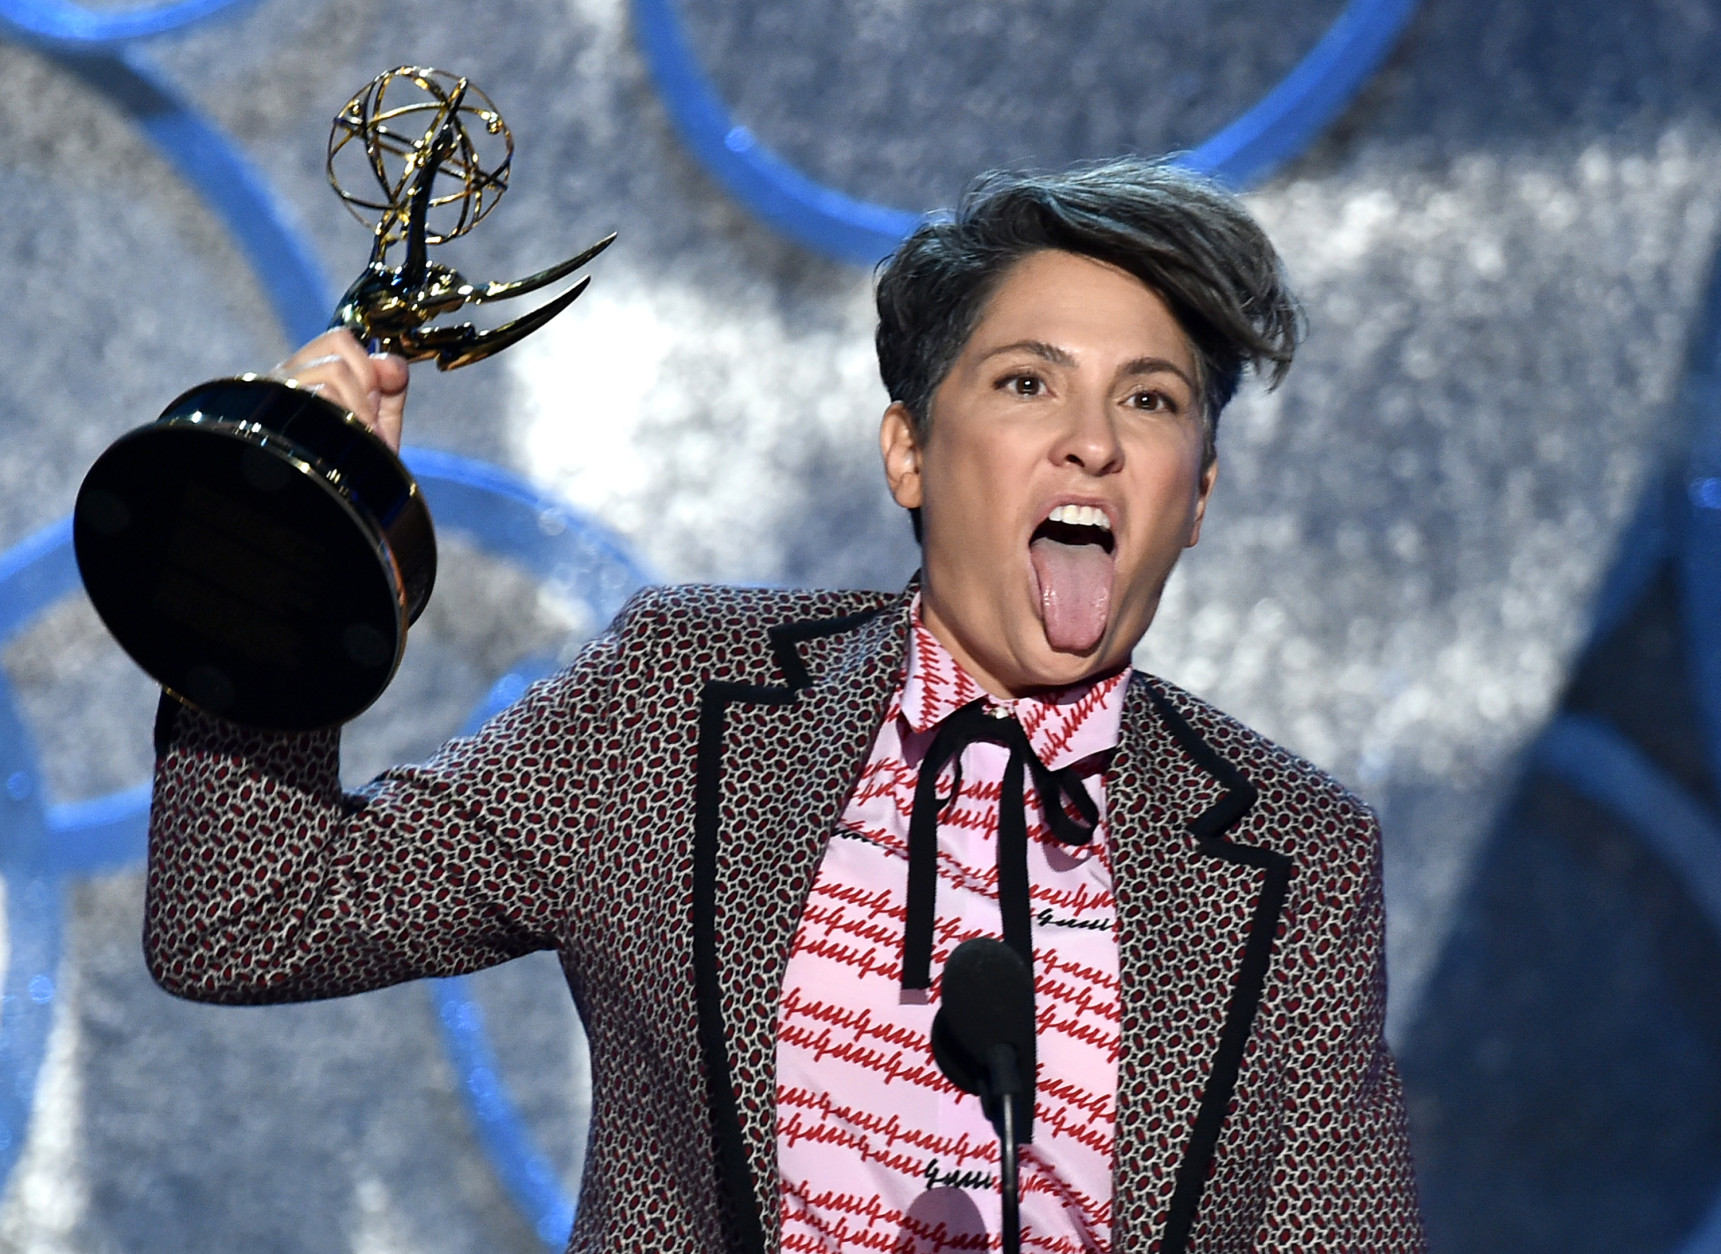 Jill Soloway accepts the award for outstanding directing for a comedy series for Transparent at the 68th Primetime Emmy Awards on Sunday, Sept. 18, 2016, at the Microsoft Theater in Los Angeles. (Photo by Vince Bucci/Invision for the Television Academy/AP Images)